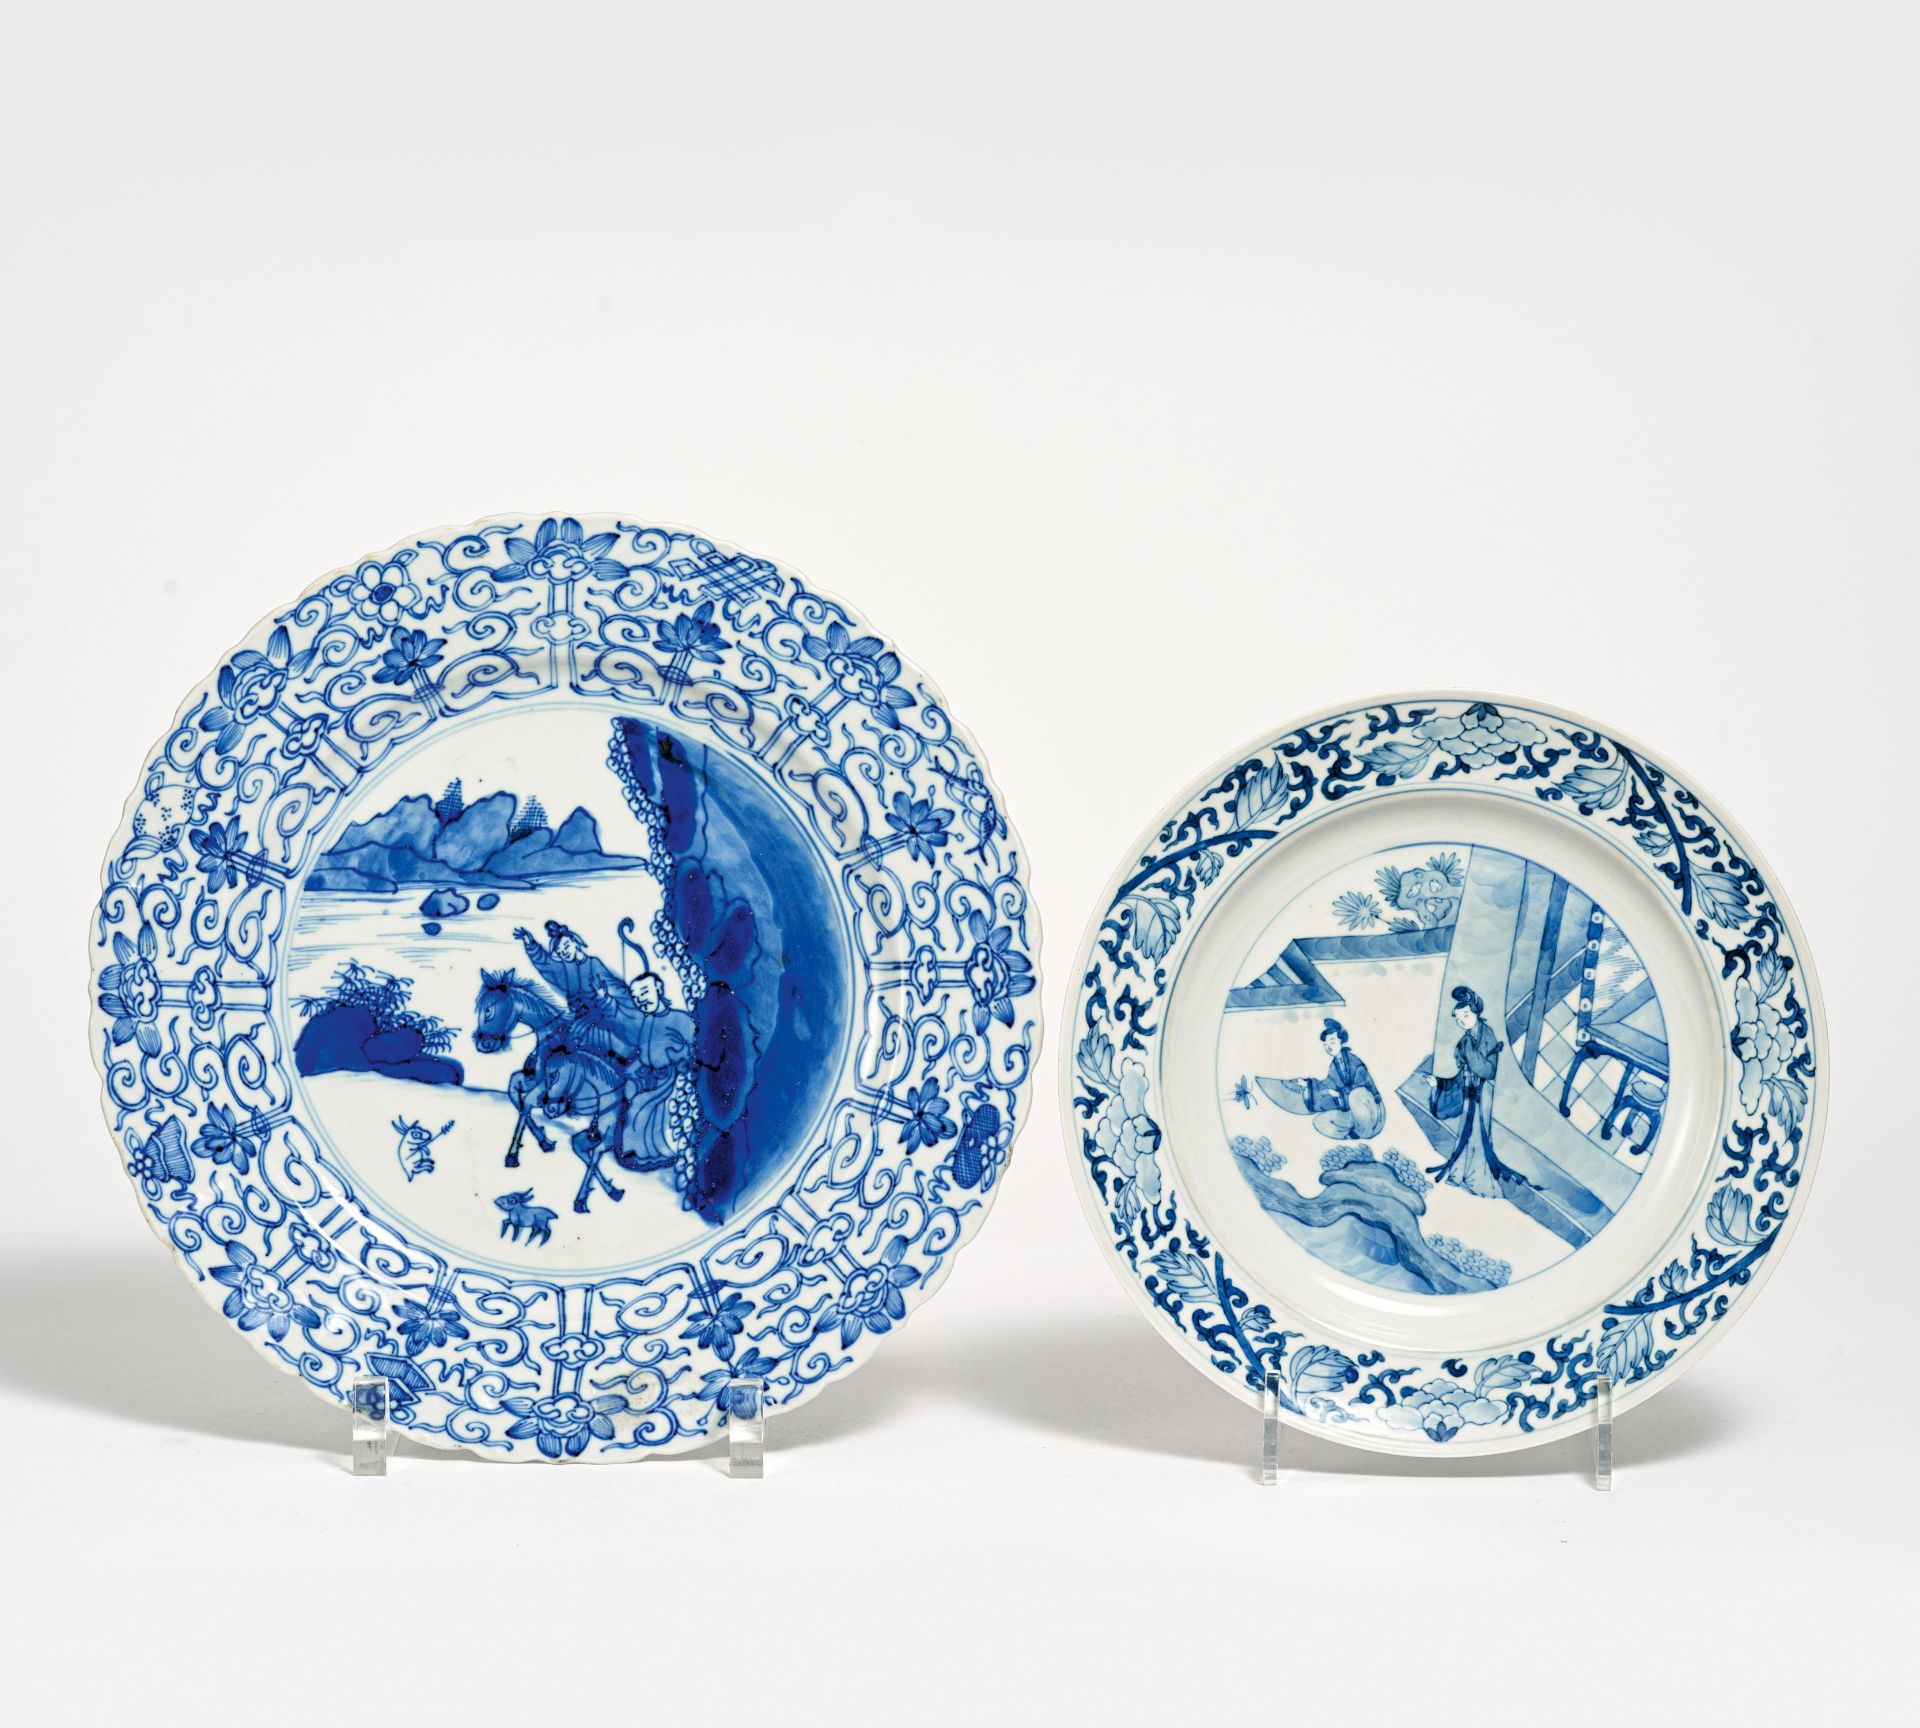 TWO UNDERGLAZE BLUE DISHES WITH LOTOS RIM. China. Porcelain painted underglaze blue. a) Two